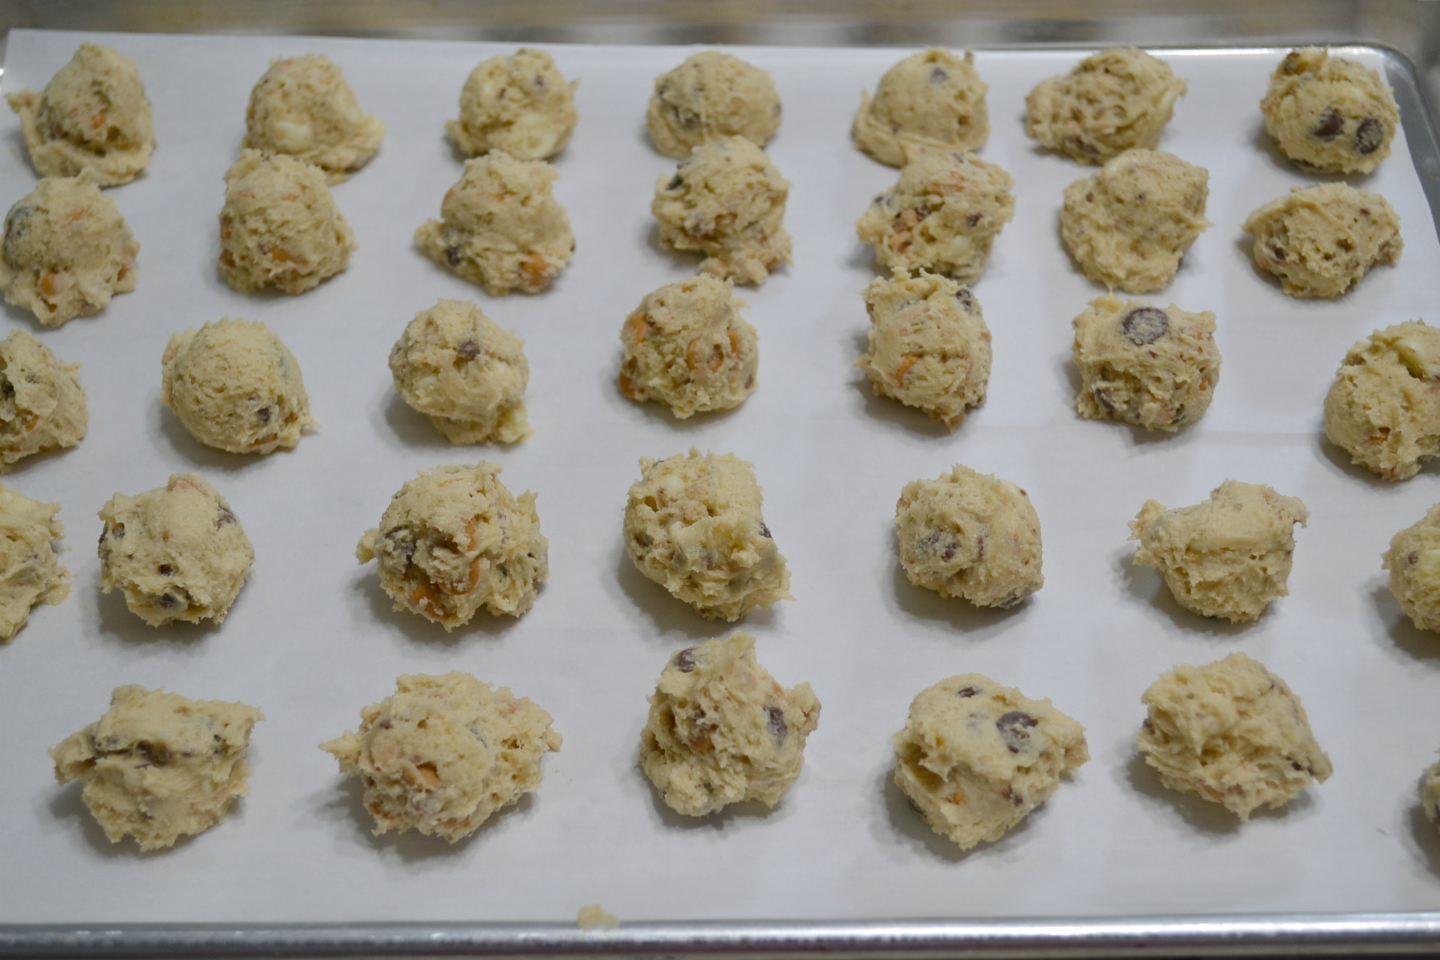 Preparing freezer cookie dough balls ahead of time allows you to bake fresh, homemade cookies in minutes with no mess